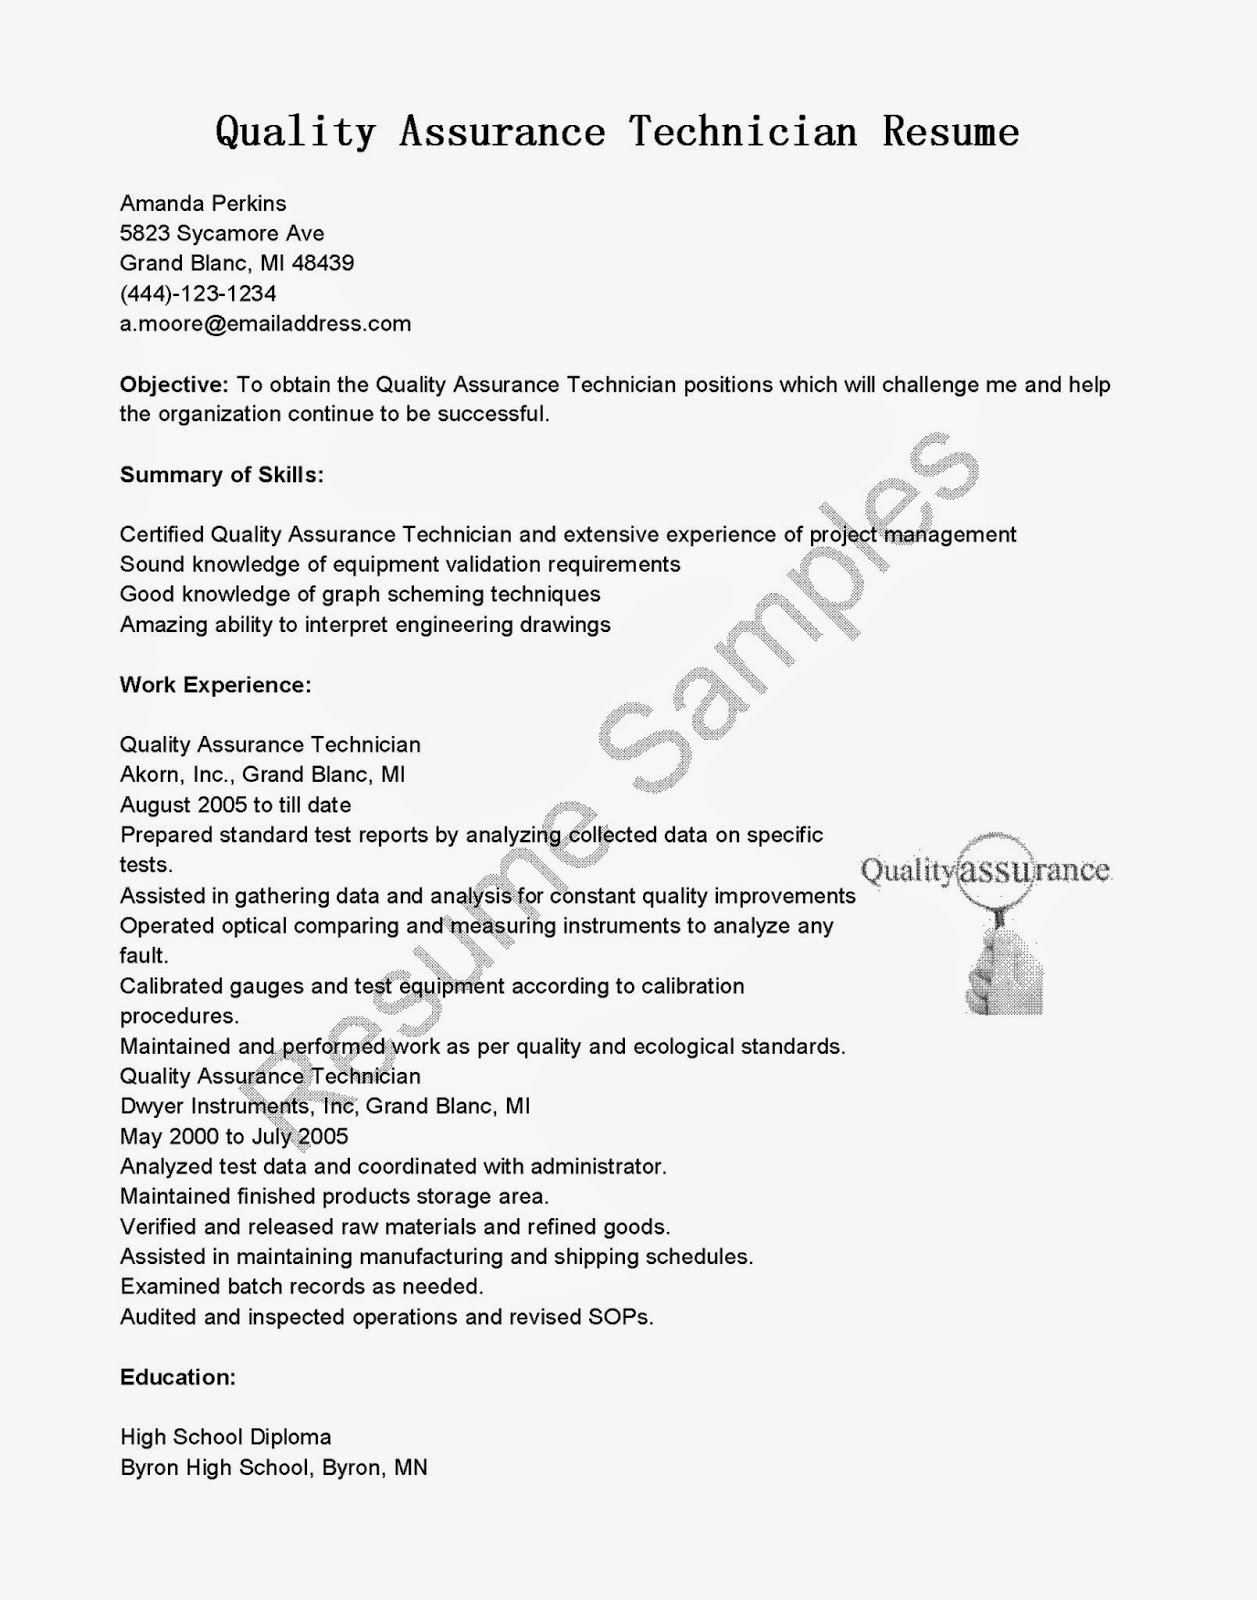 Resume examples software manager